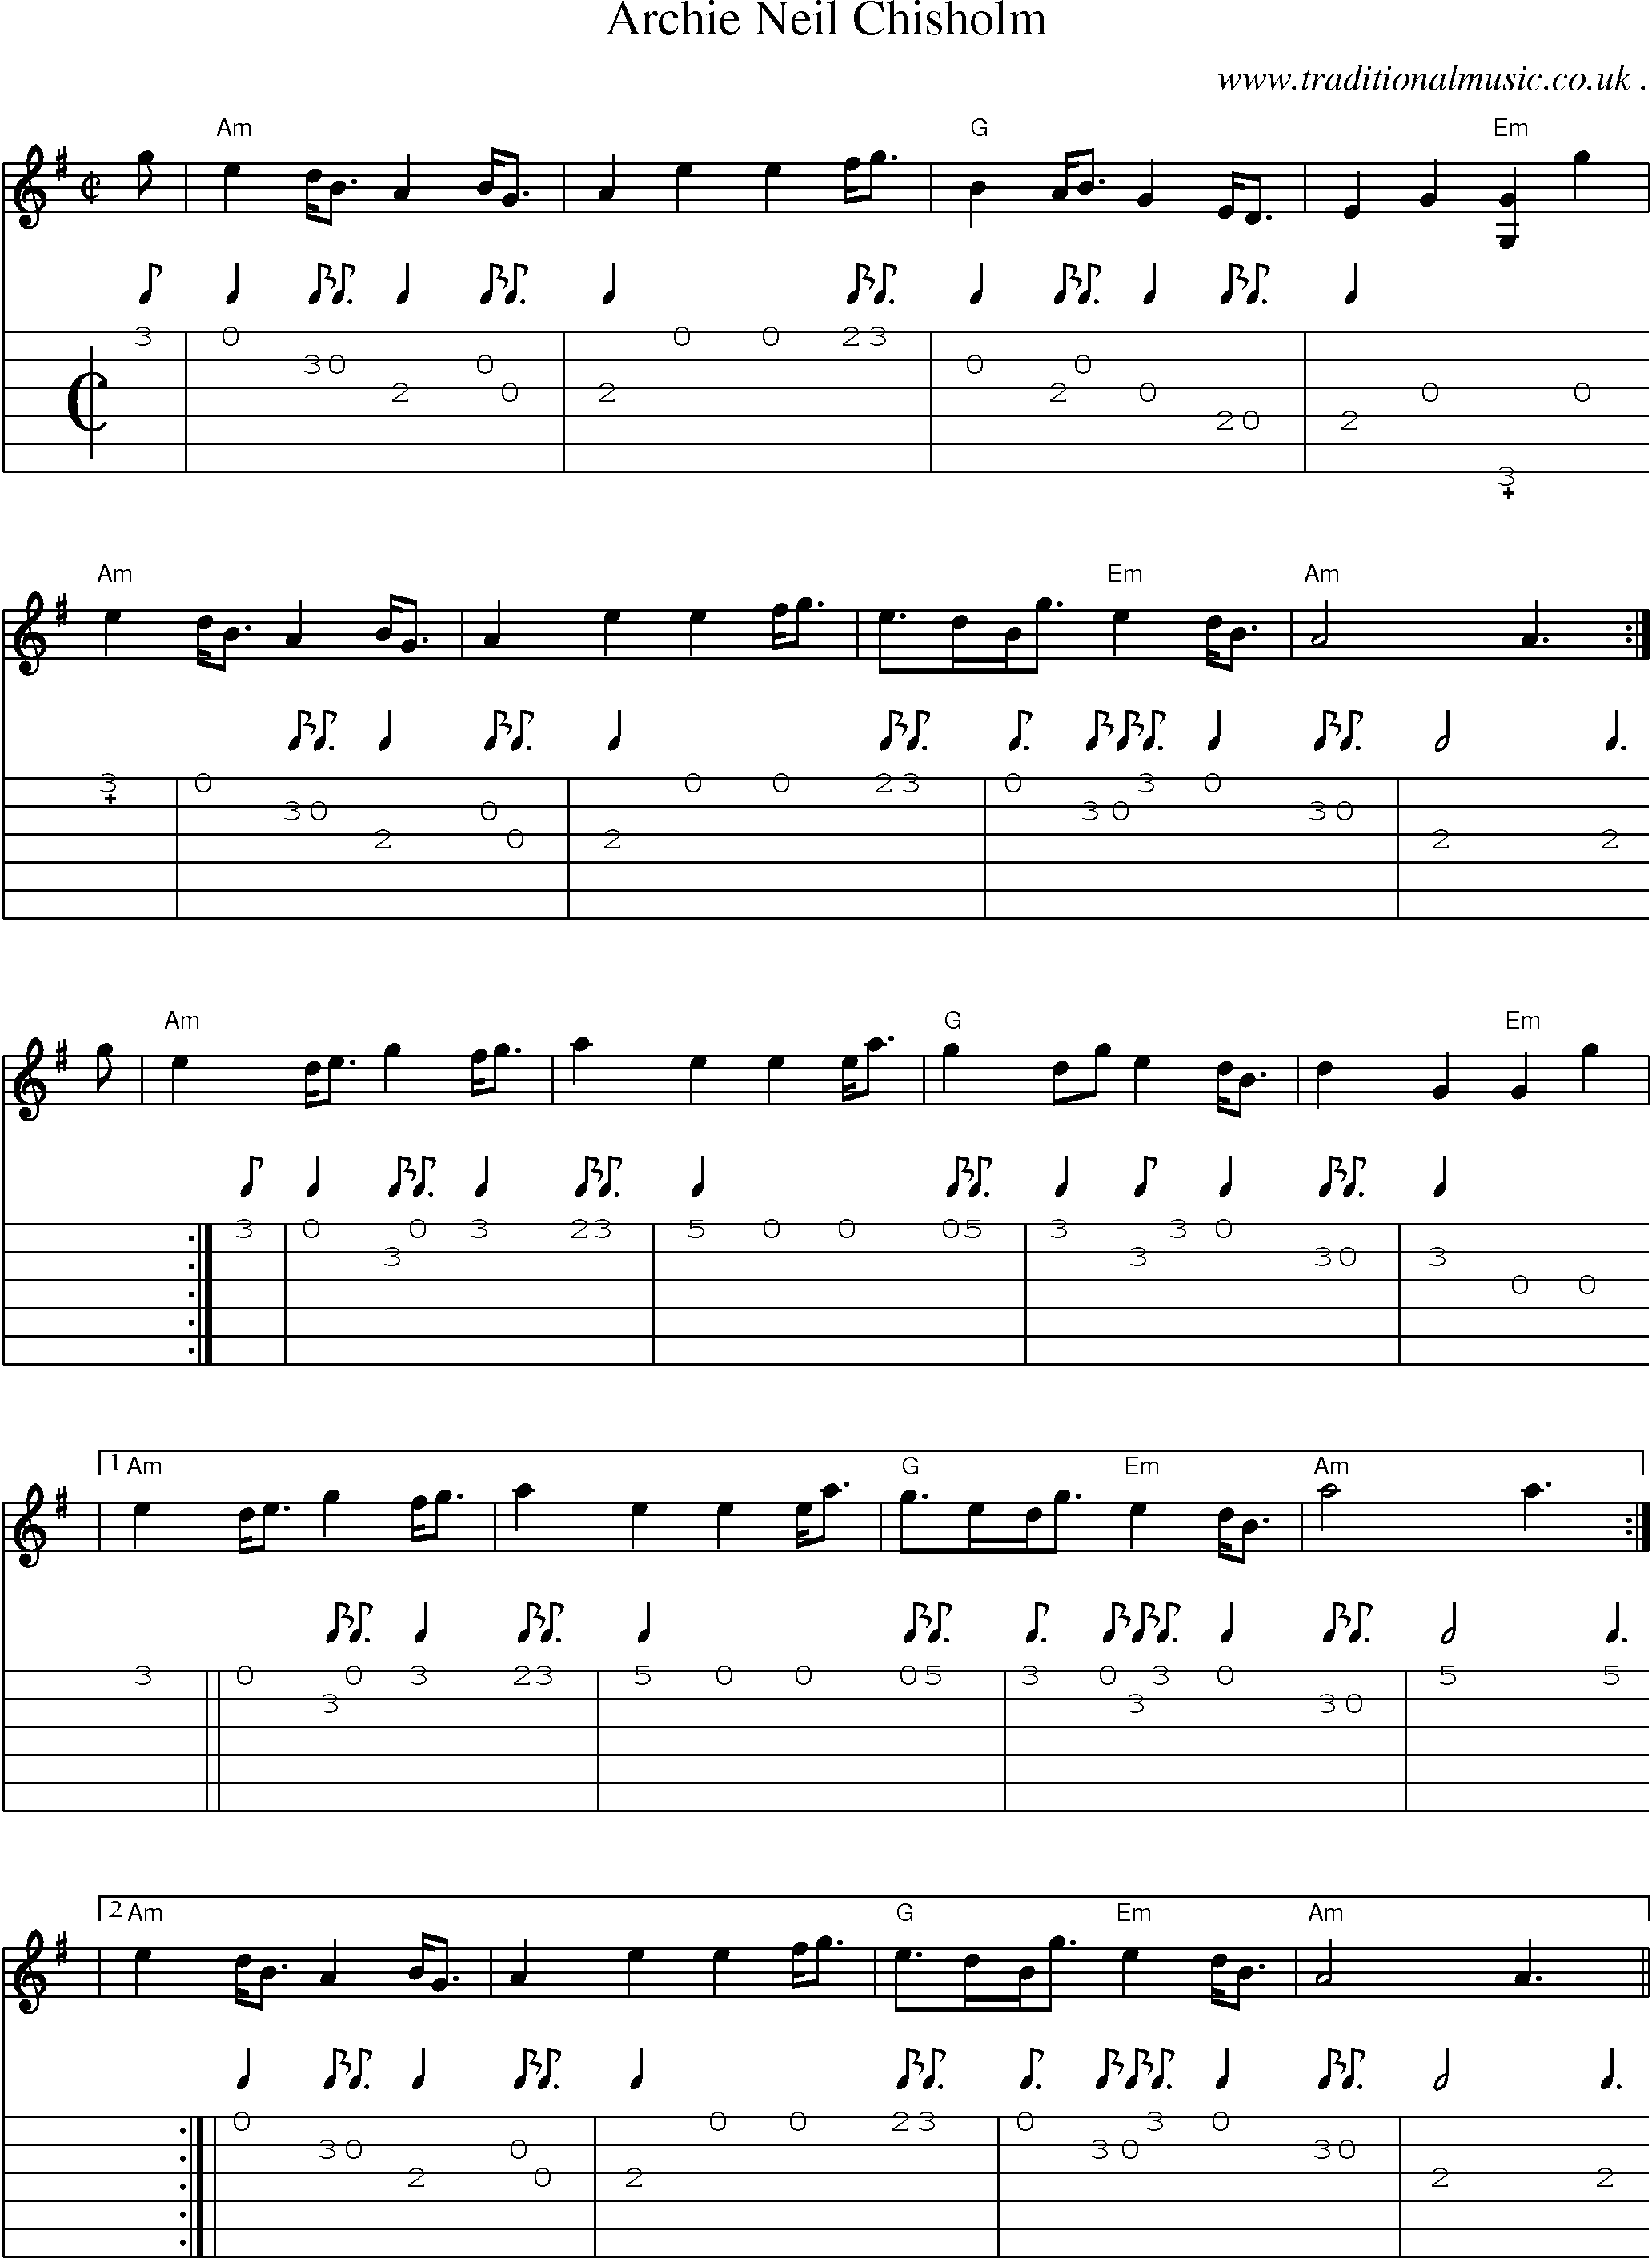 Sheet-Music and Guitar Tabs for Archie Neil Chisholm